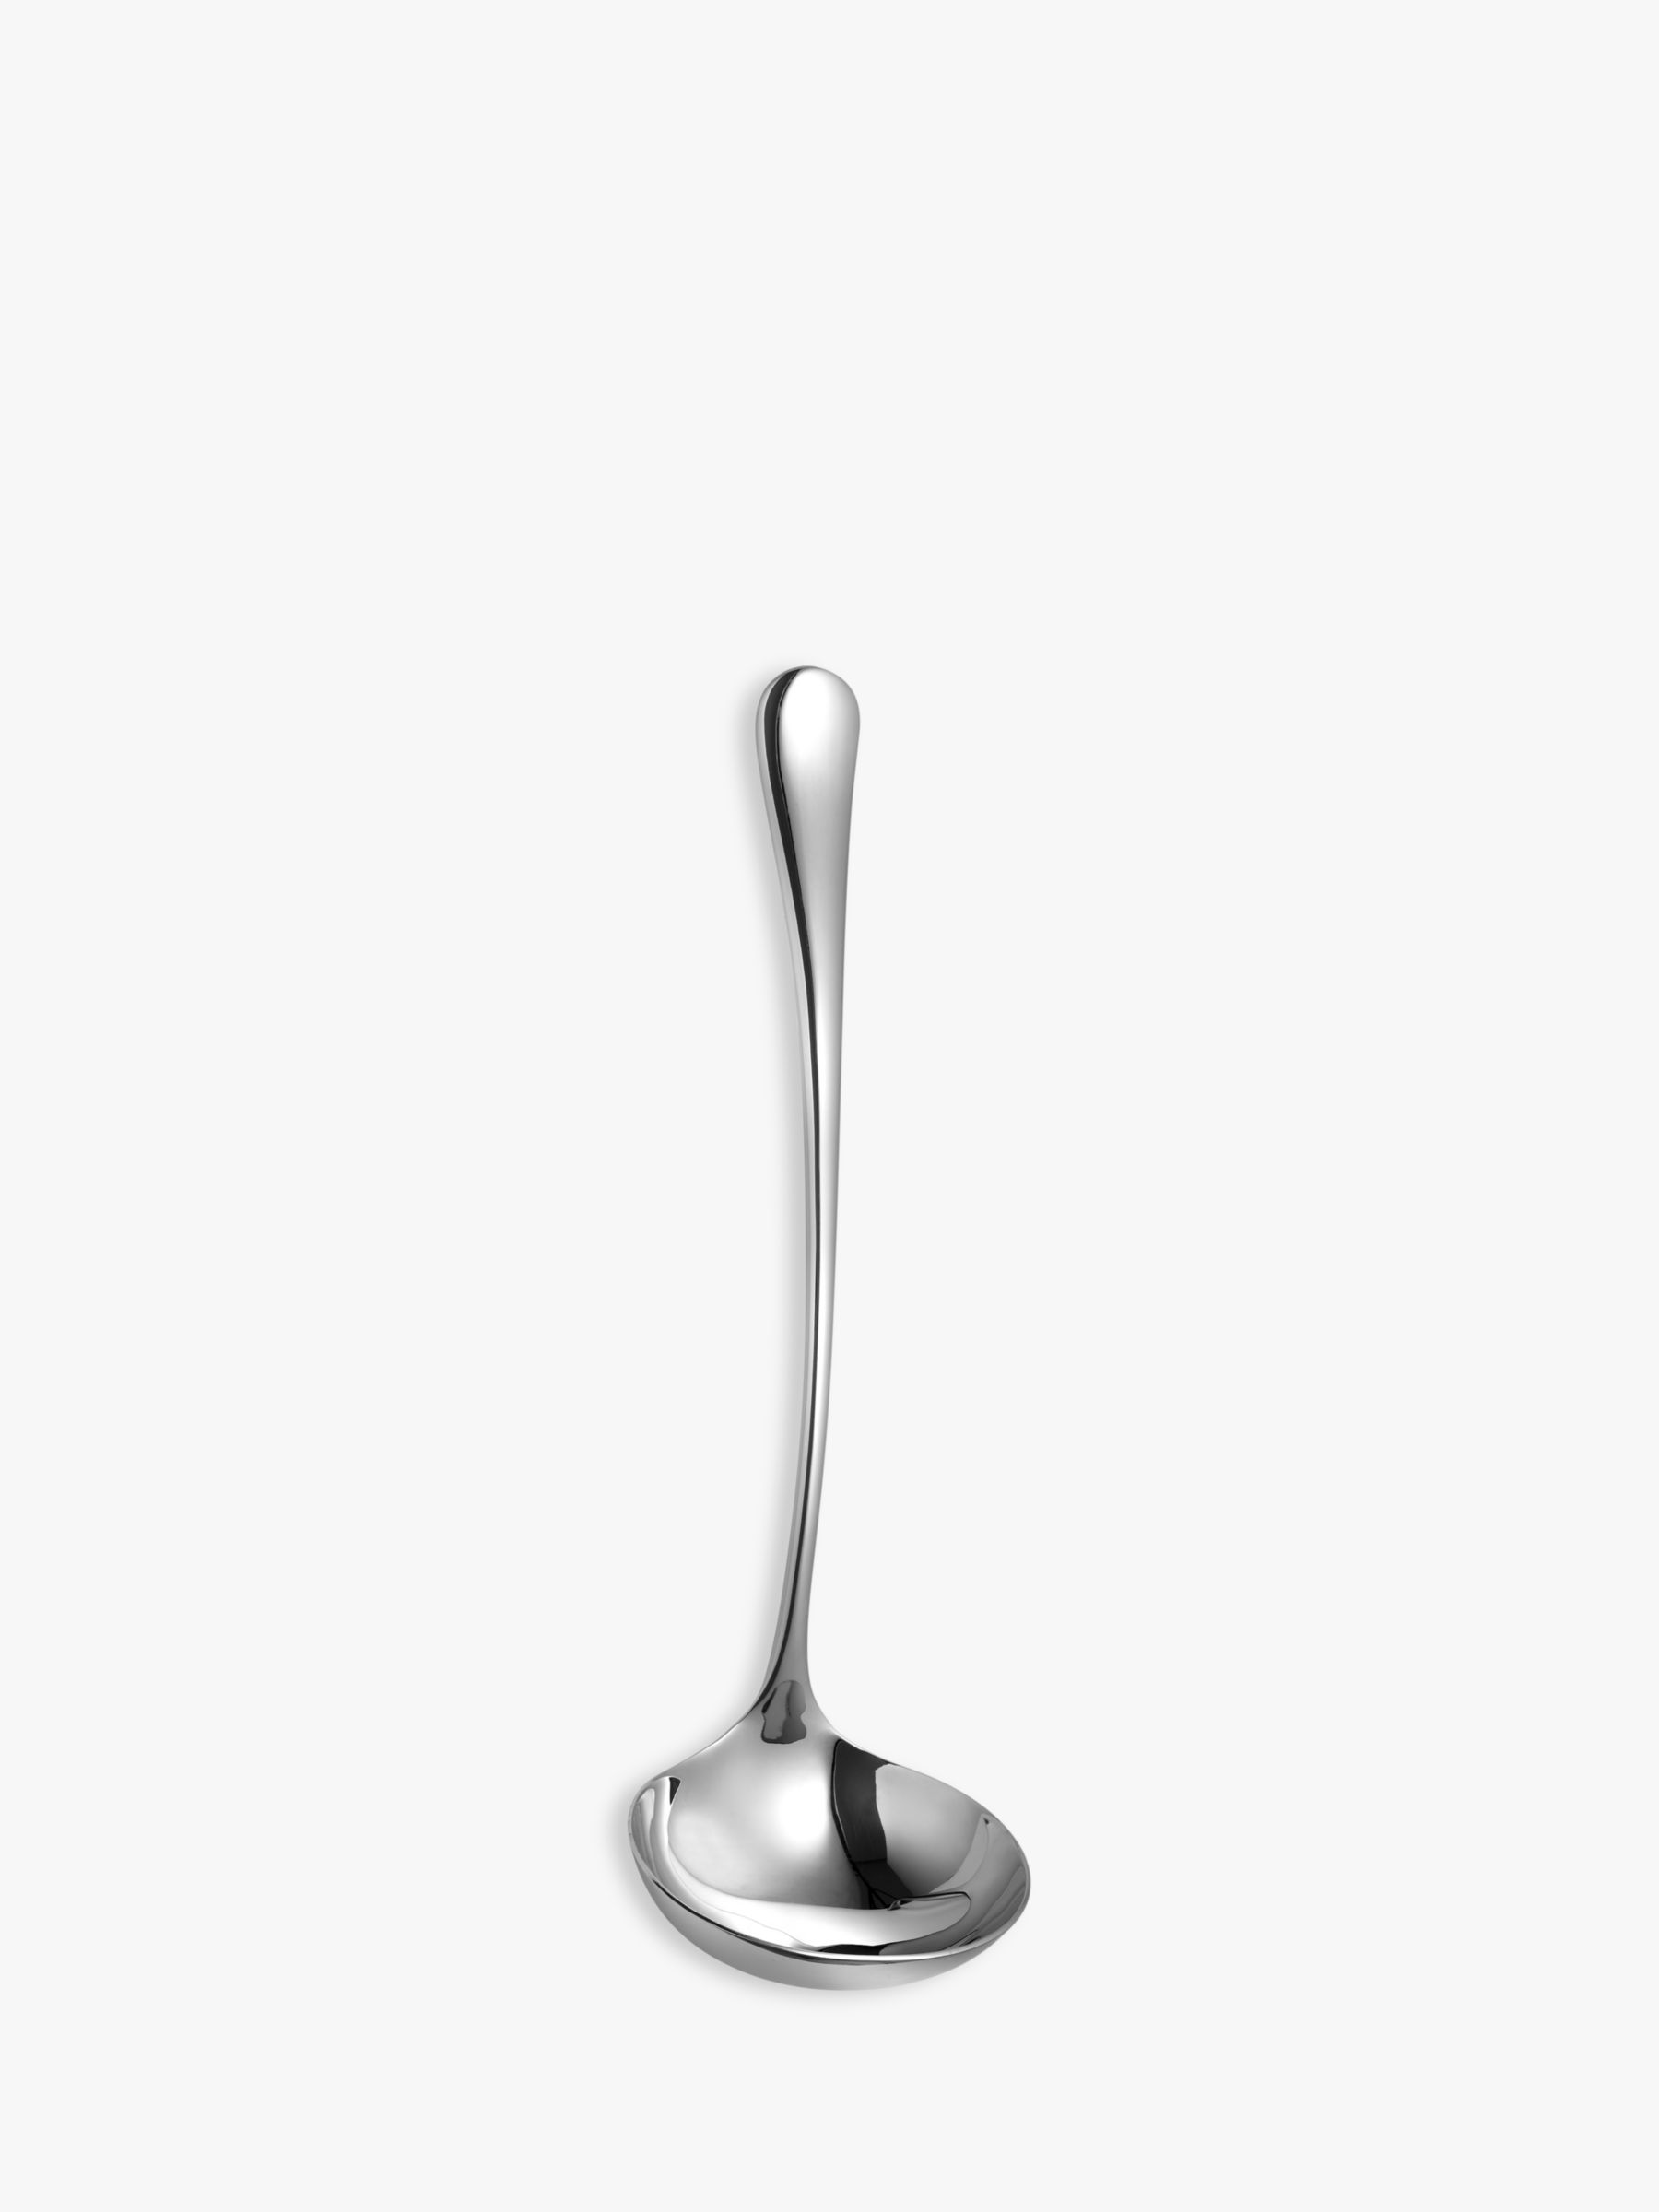 Radford Soup Ladle, Stainless Steel